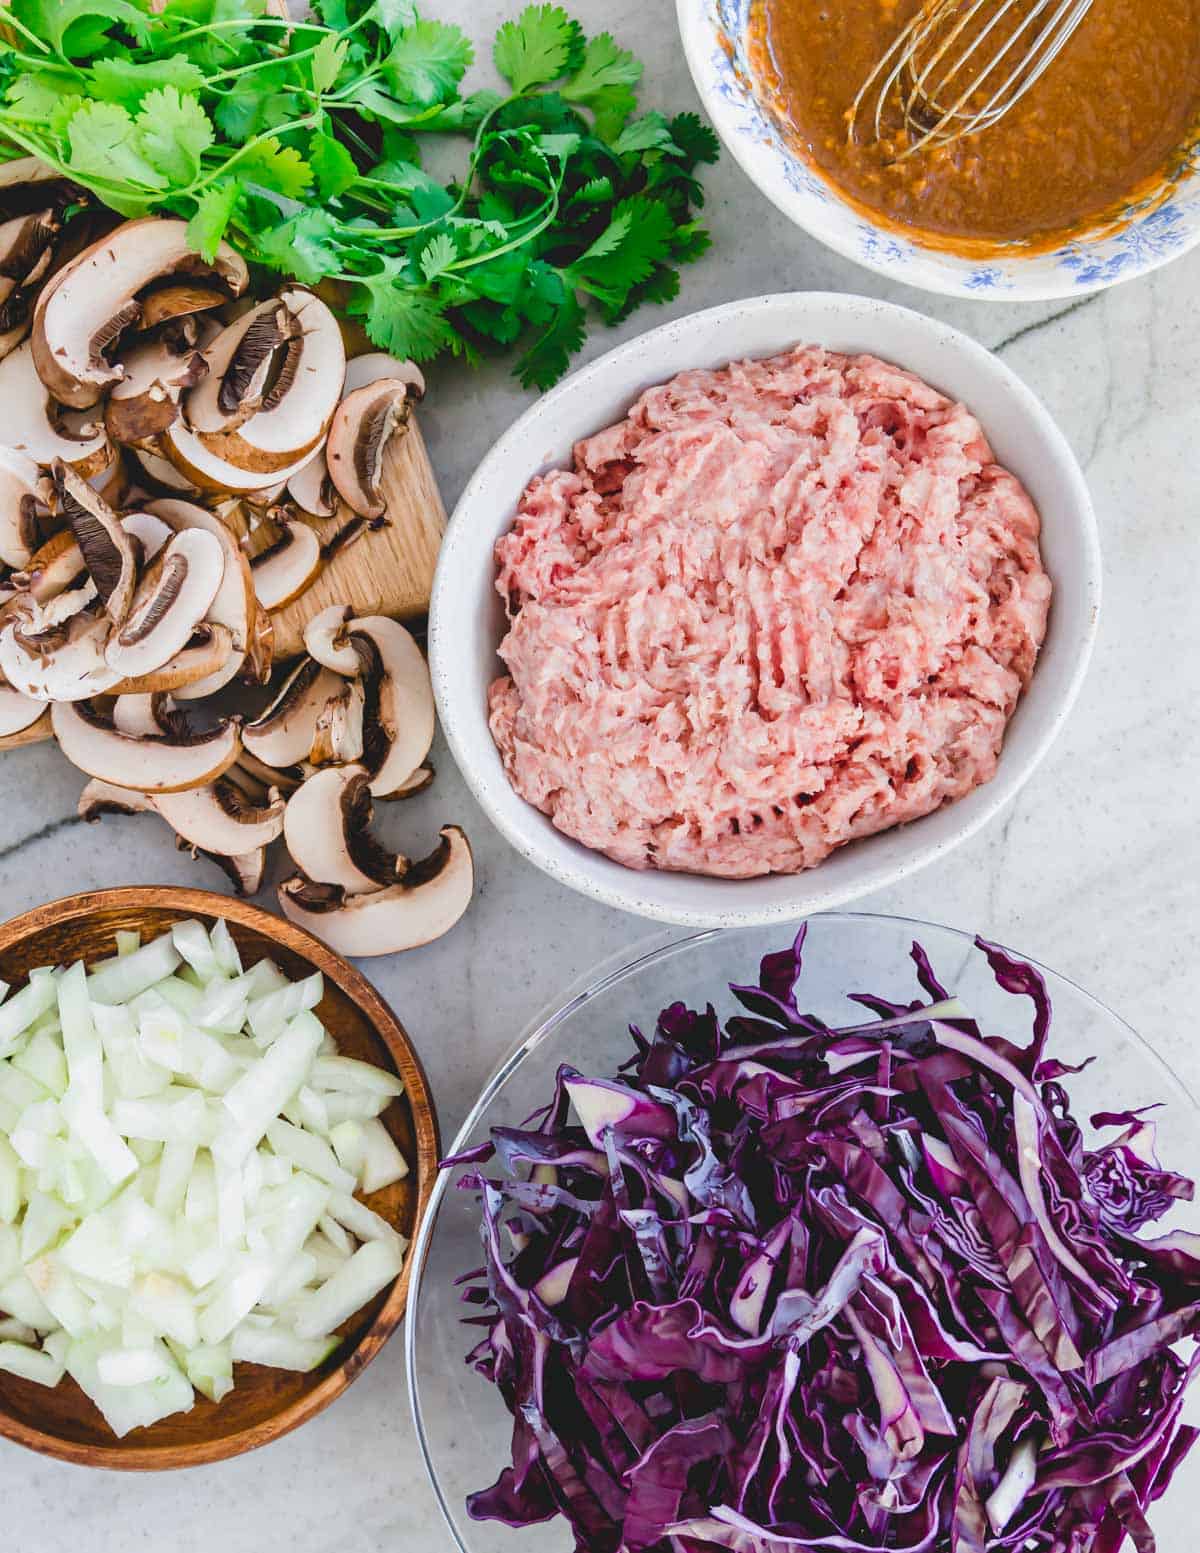 Ingredients to make a pork and cabbage skillet recipe including ground pork, sliced red cabbage, sliced mushrooms, chopped onion and an Asian stir fry sauce.